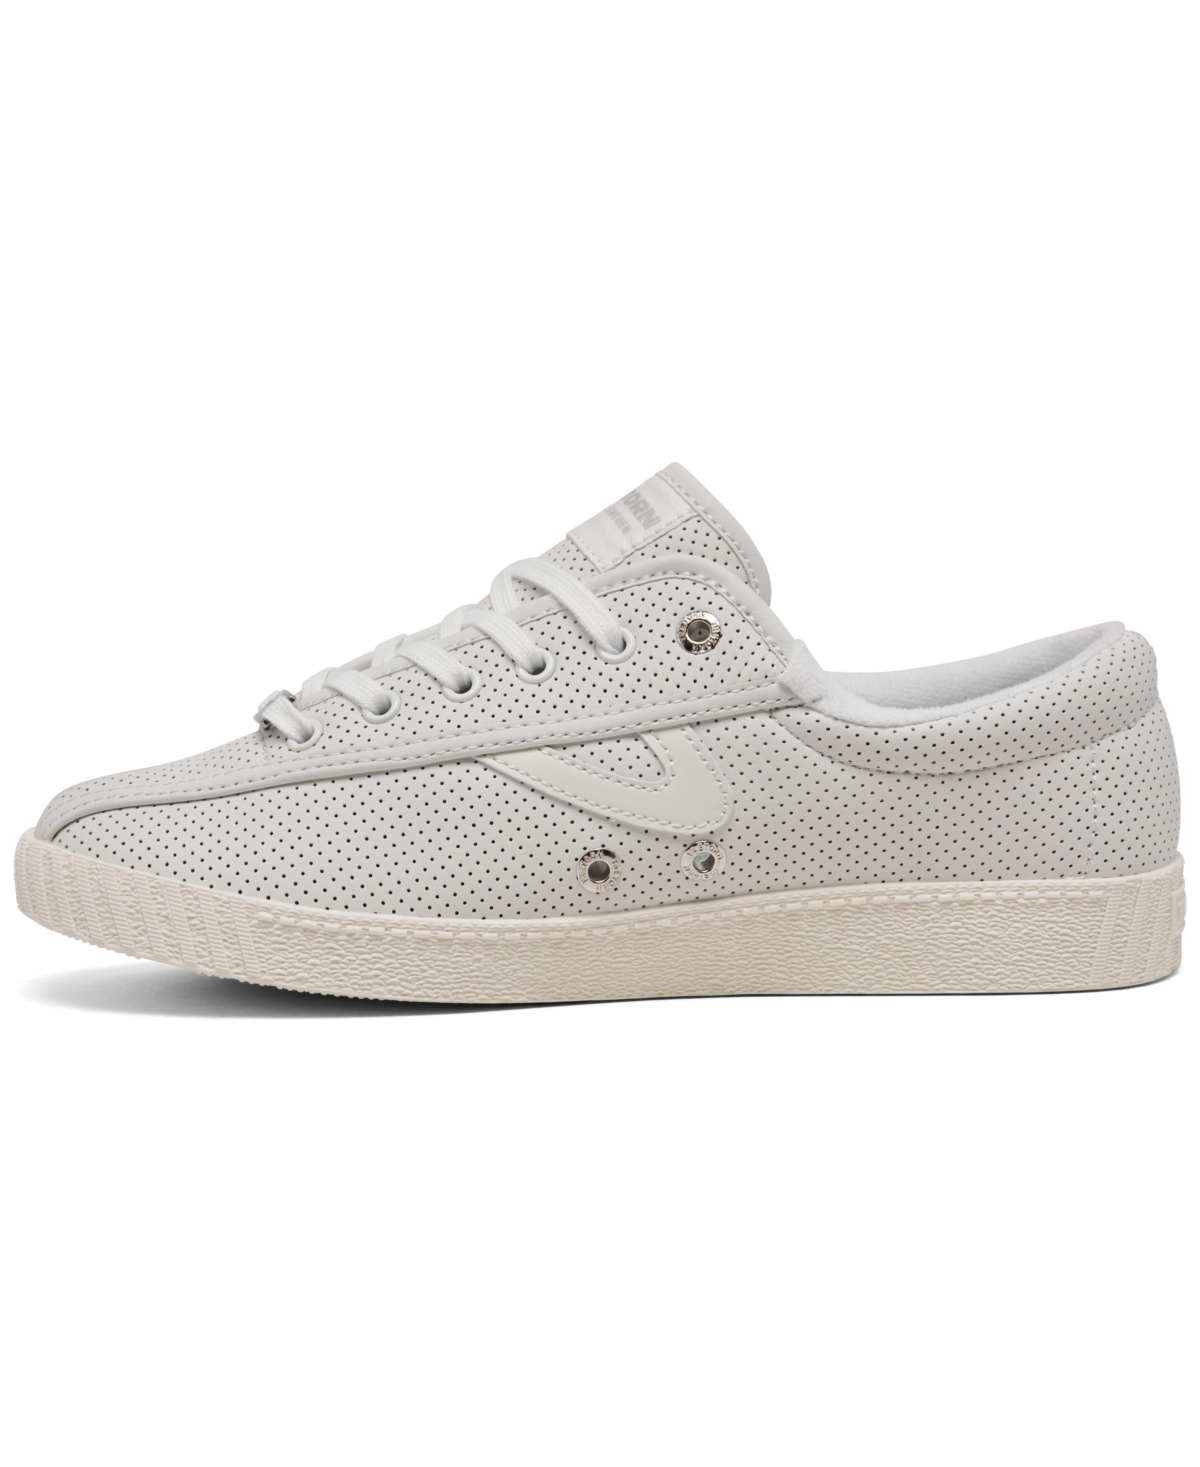 Shop Tretorn Women's Nylite Perforated Leather Casual Sneakers From Finish Line In White